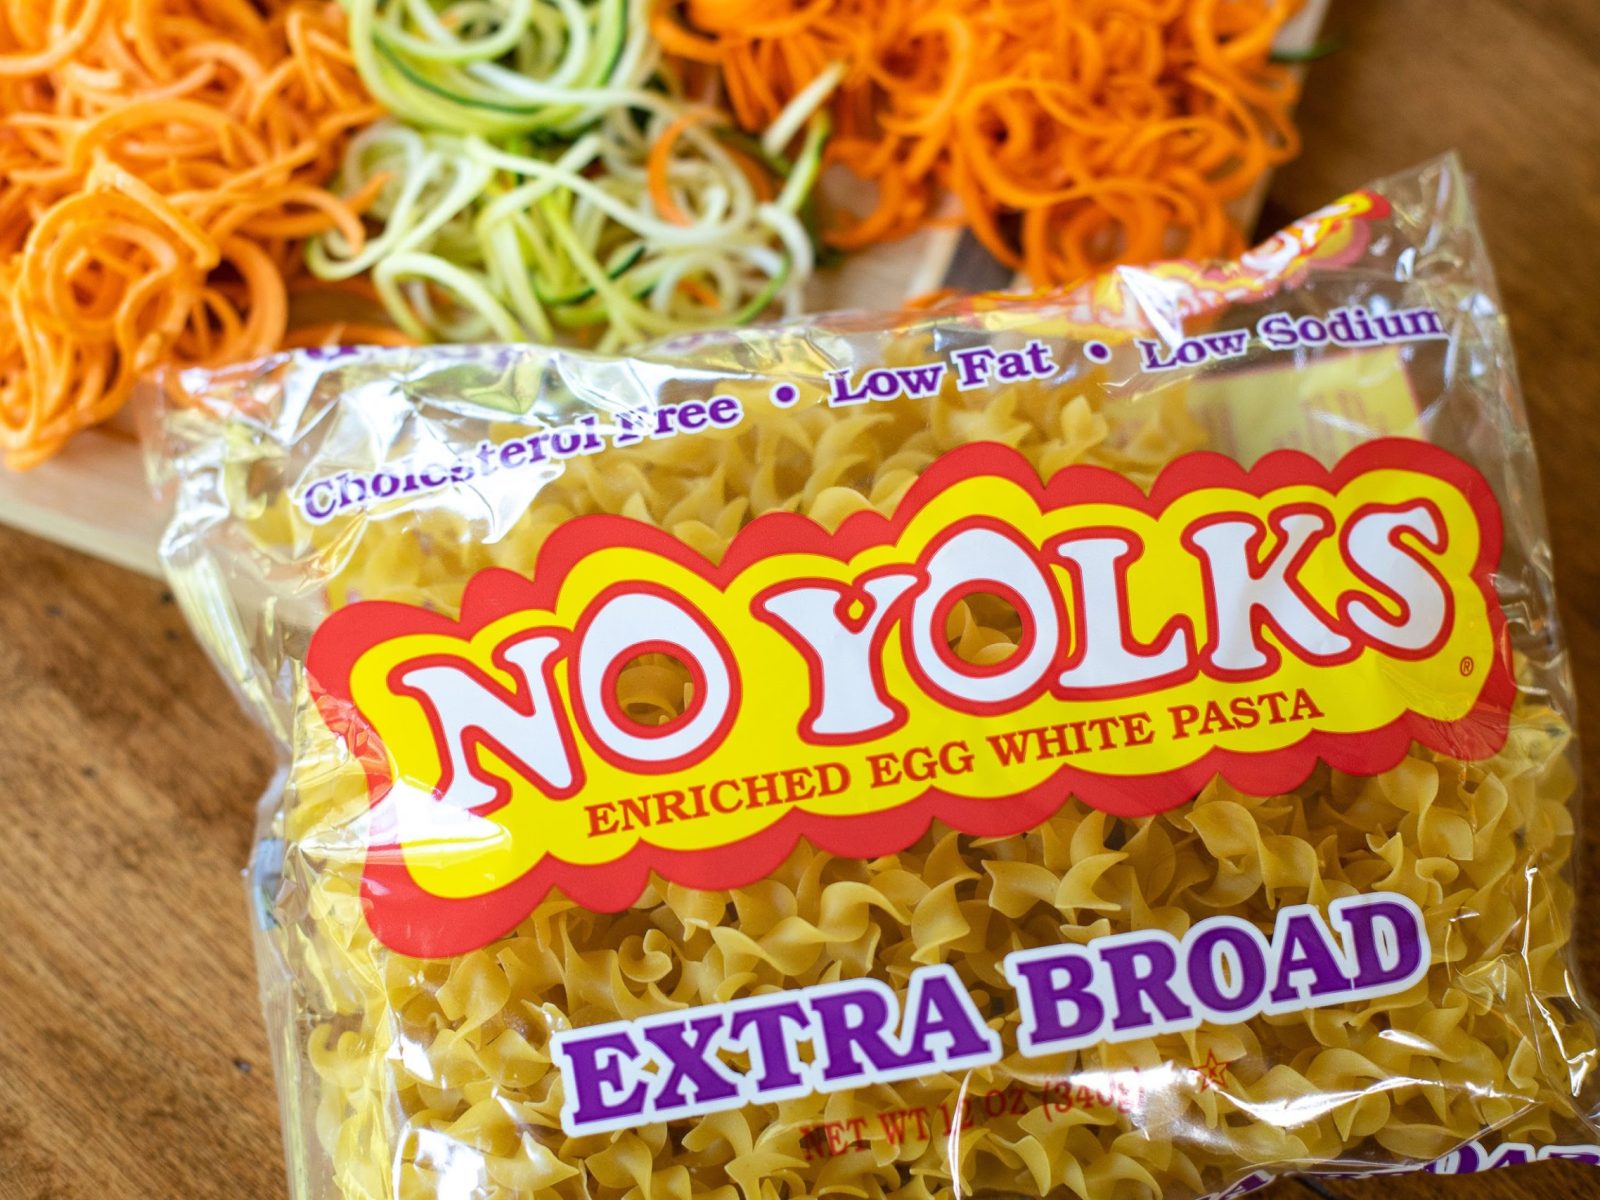 Get The Bags Of No Yolks Pasta For Just $1.75 At Kroger (Regular Price $3.29)